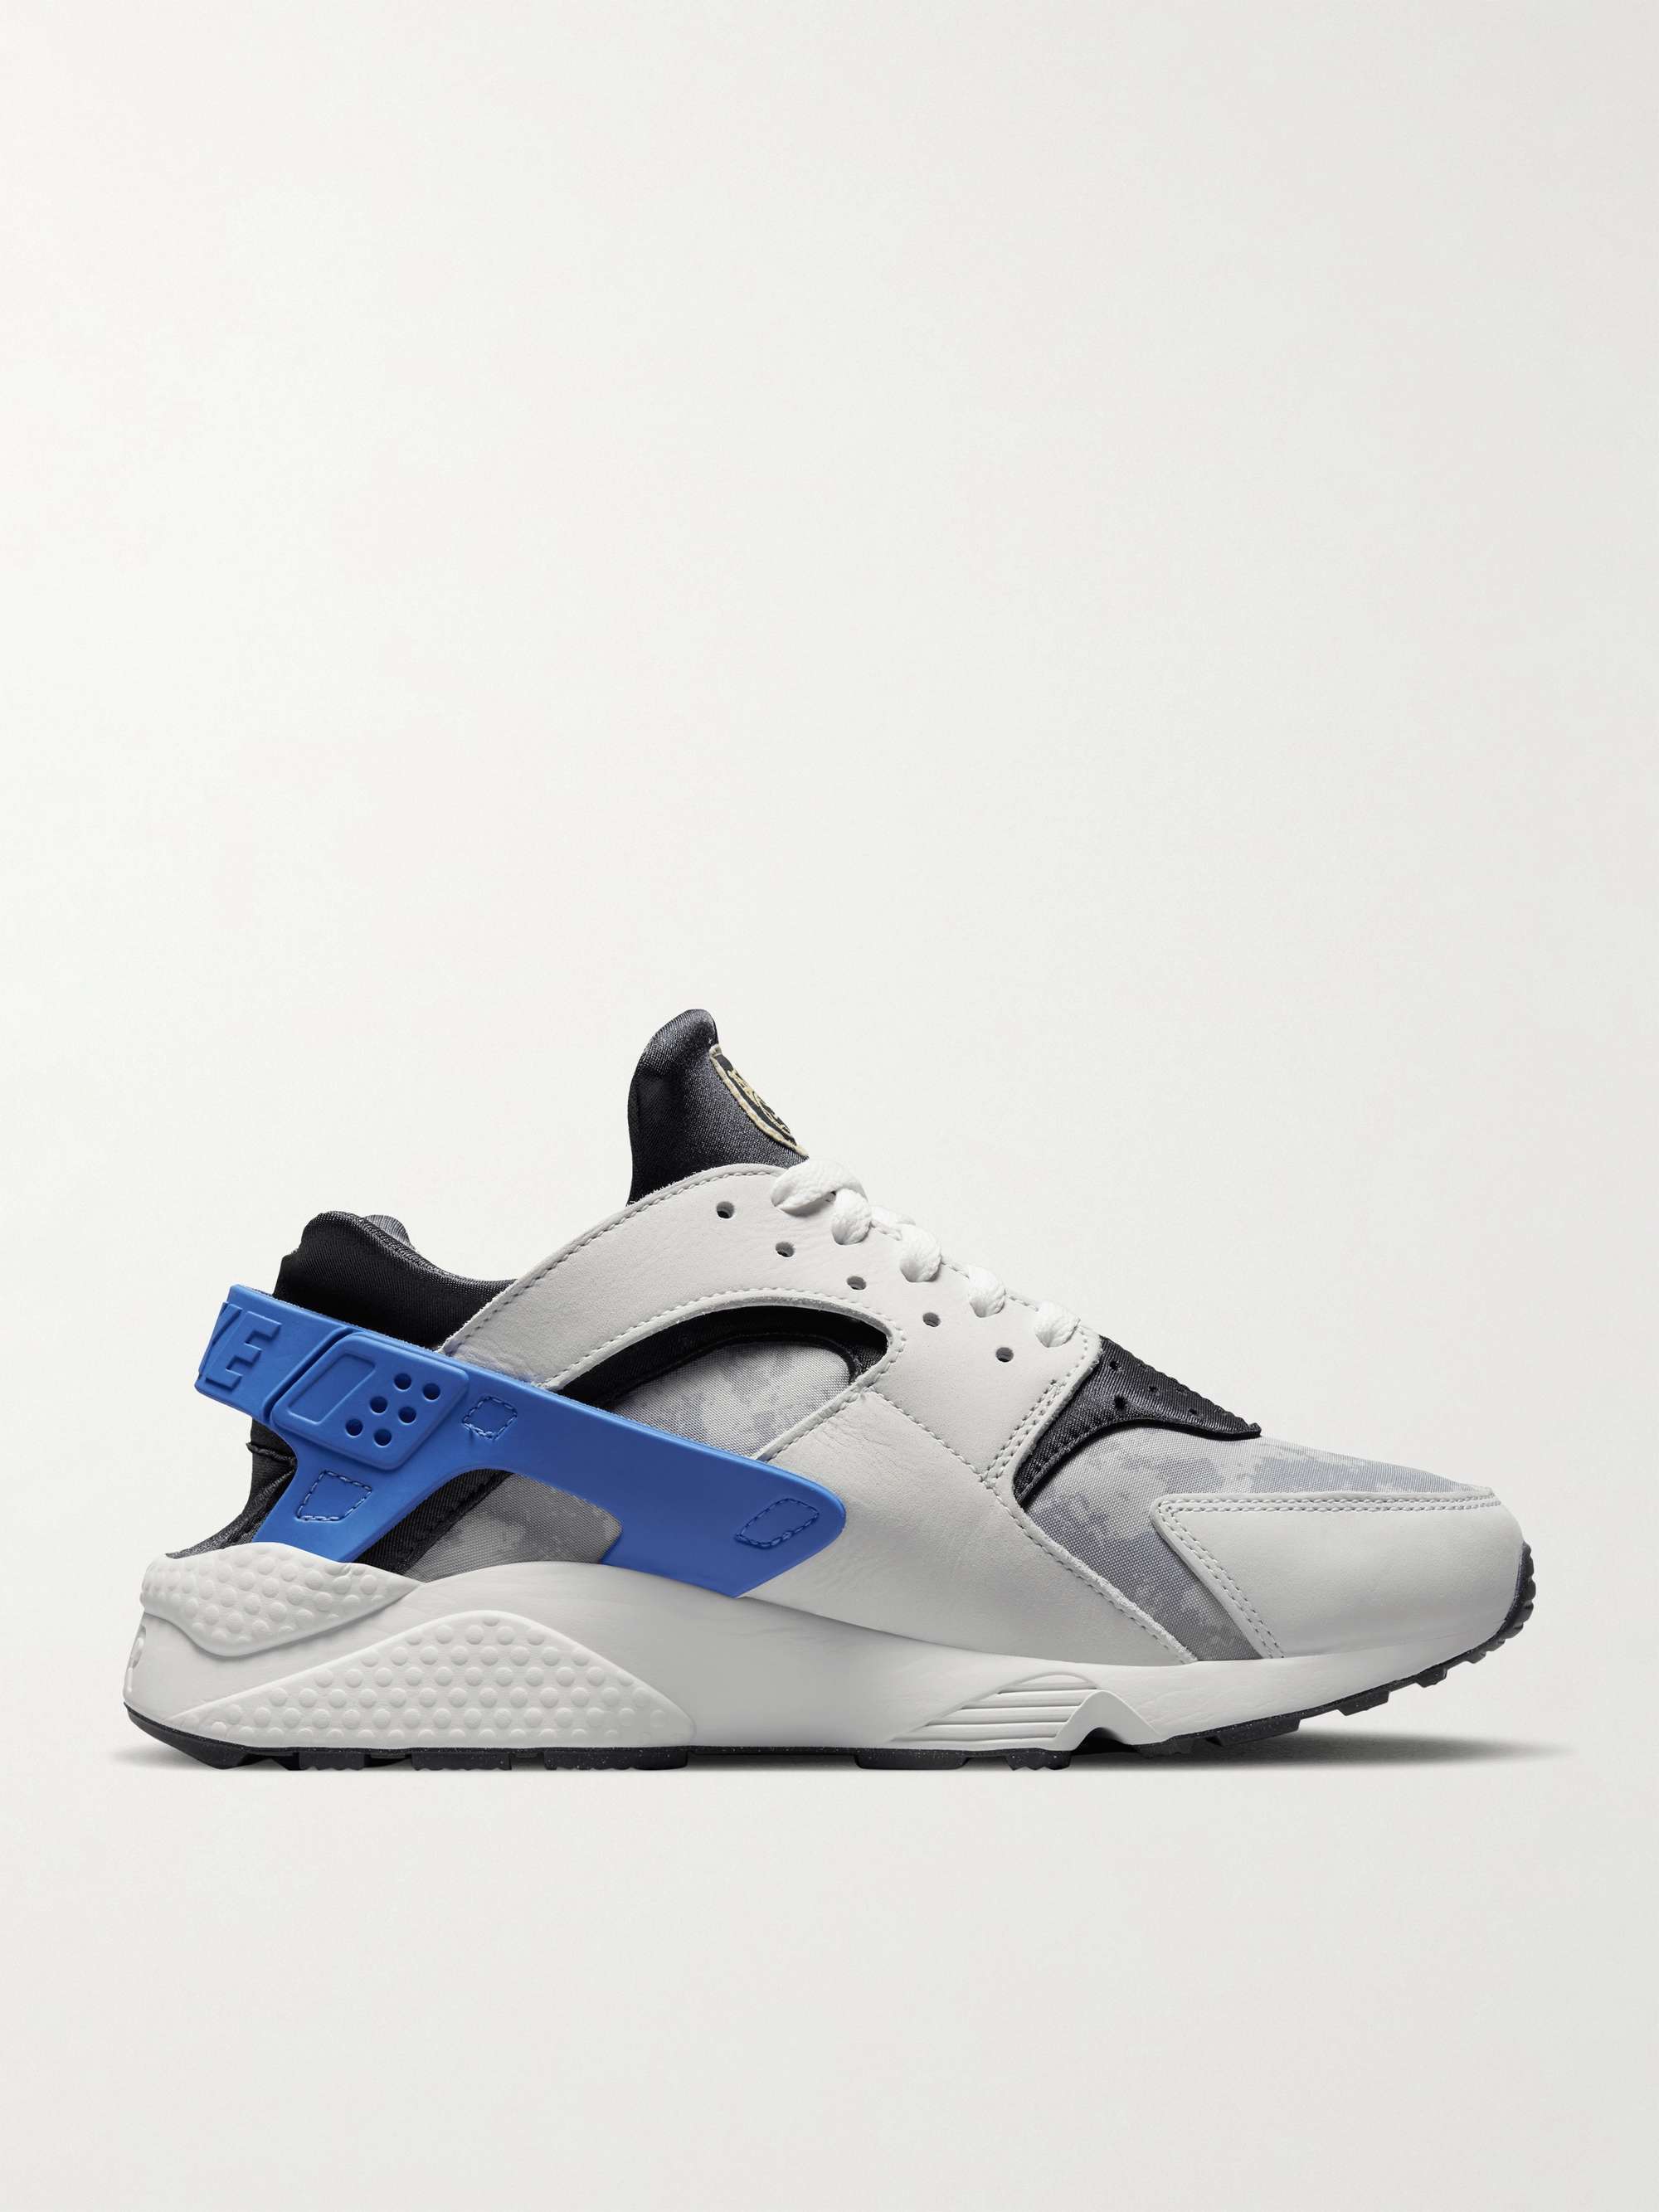 Contract salade drie NIKE Air Huarache PRM Leather and Rubber-Trimmed Neoprene Sneakers for Men  | MR PORTER